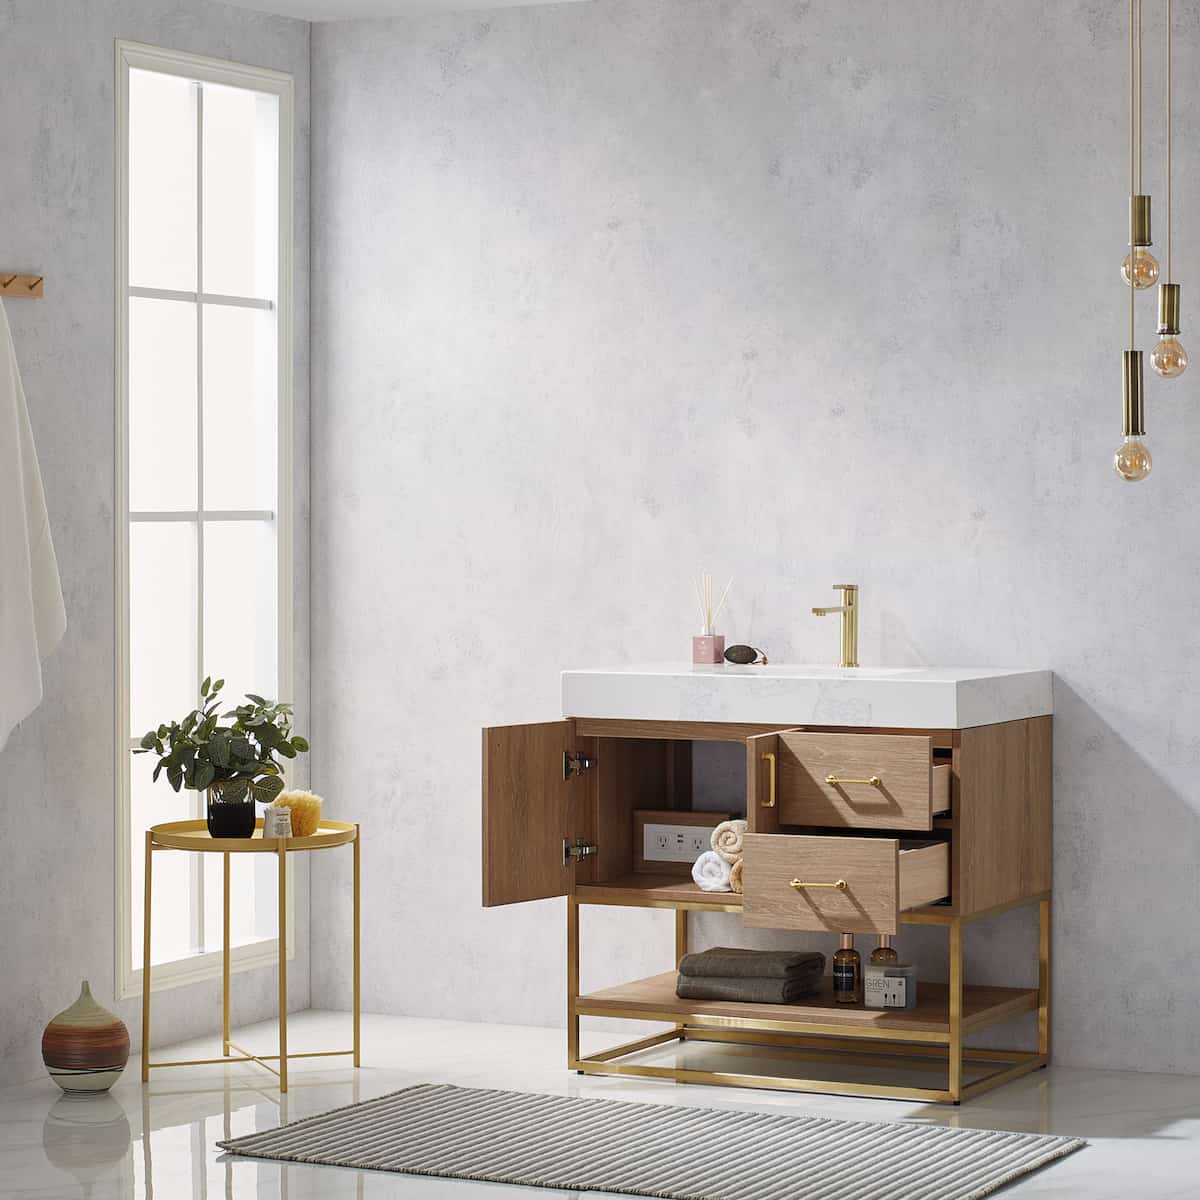 Vinnova Alistair 36 Inch Freestanding Single Vanity in North American Oak and Brushed Gold Frame with White Grain Stone Countertop Without Mirror Inside 789036-NO-GW-NM